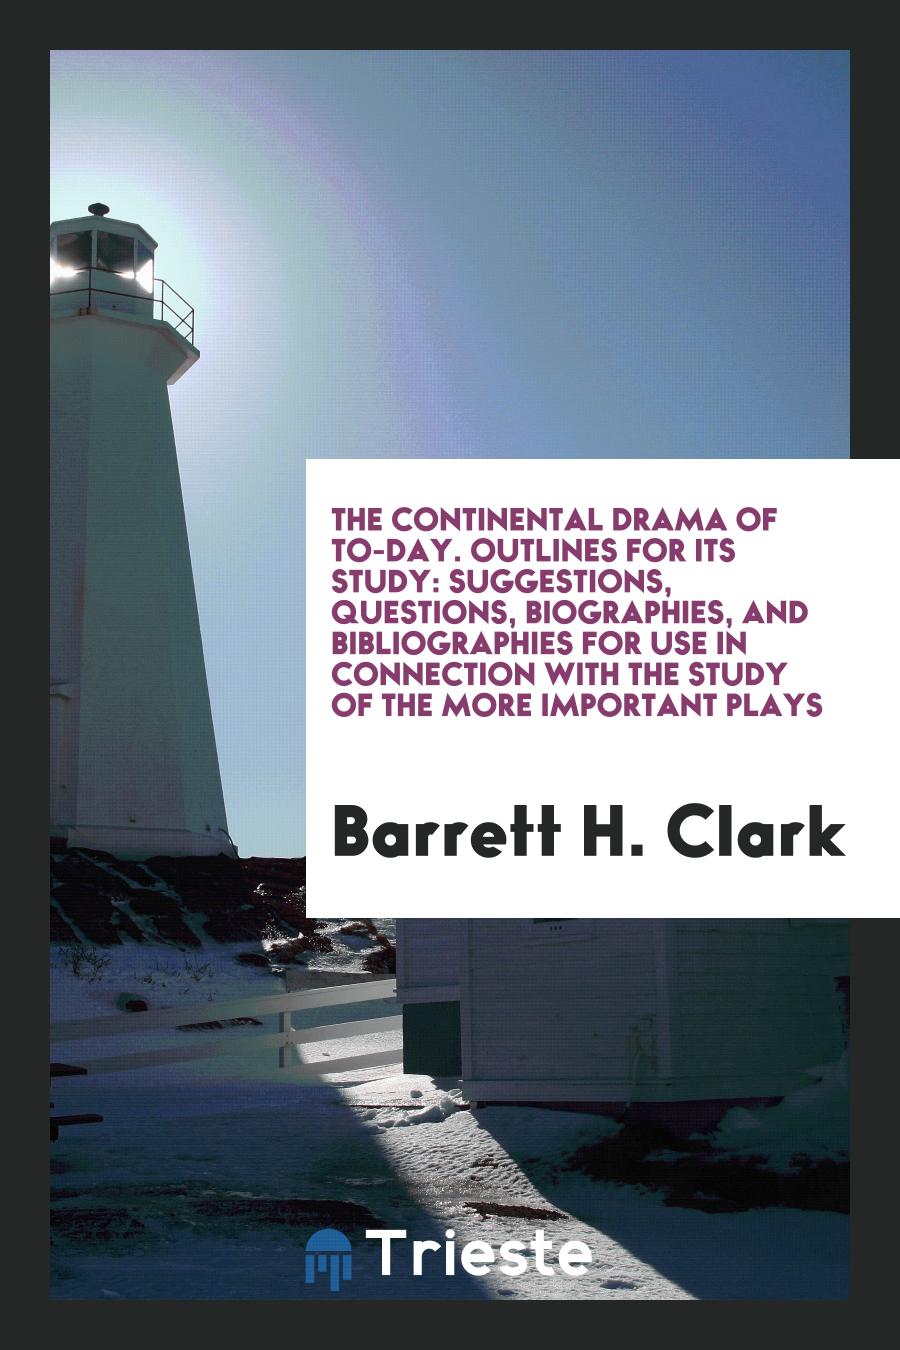 The Continental Drama of To-Day. Outlines for Its Study: Suggestions, Questions, Biographies, and Bibliographies for Use in Connection with the Study of the More Important Plays